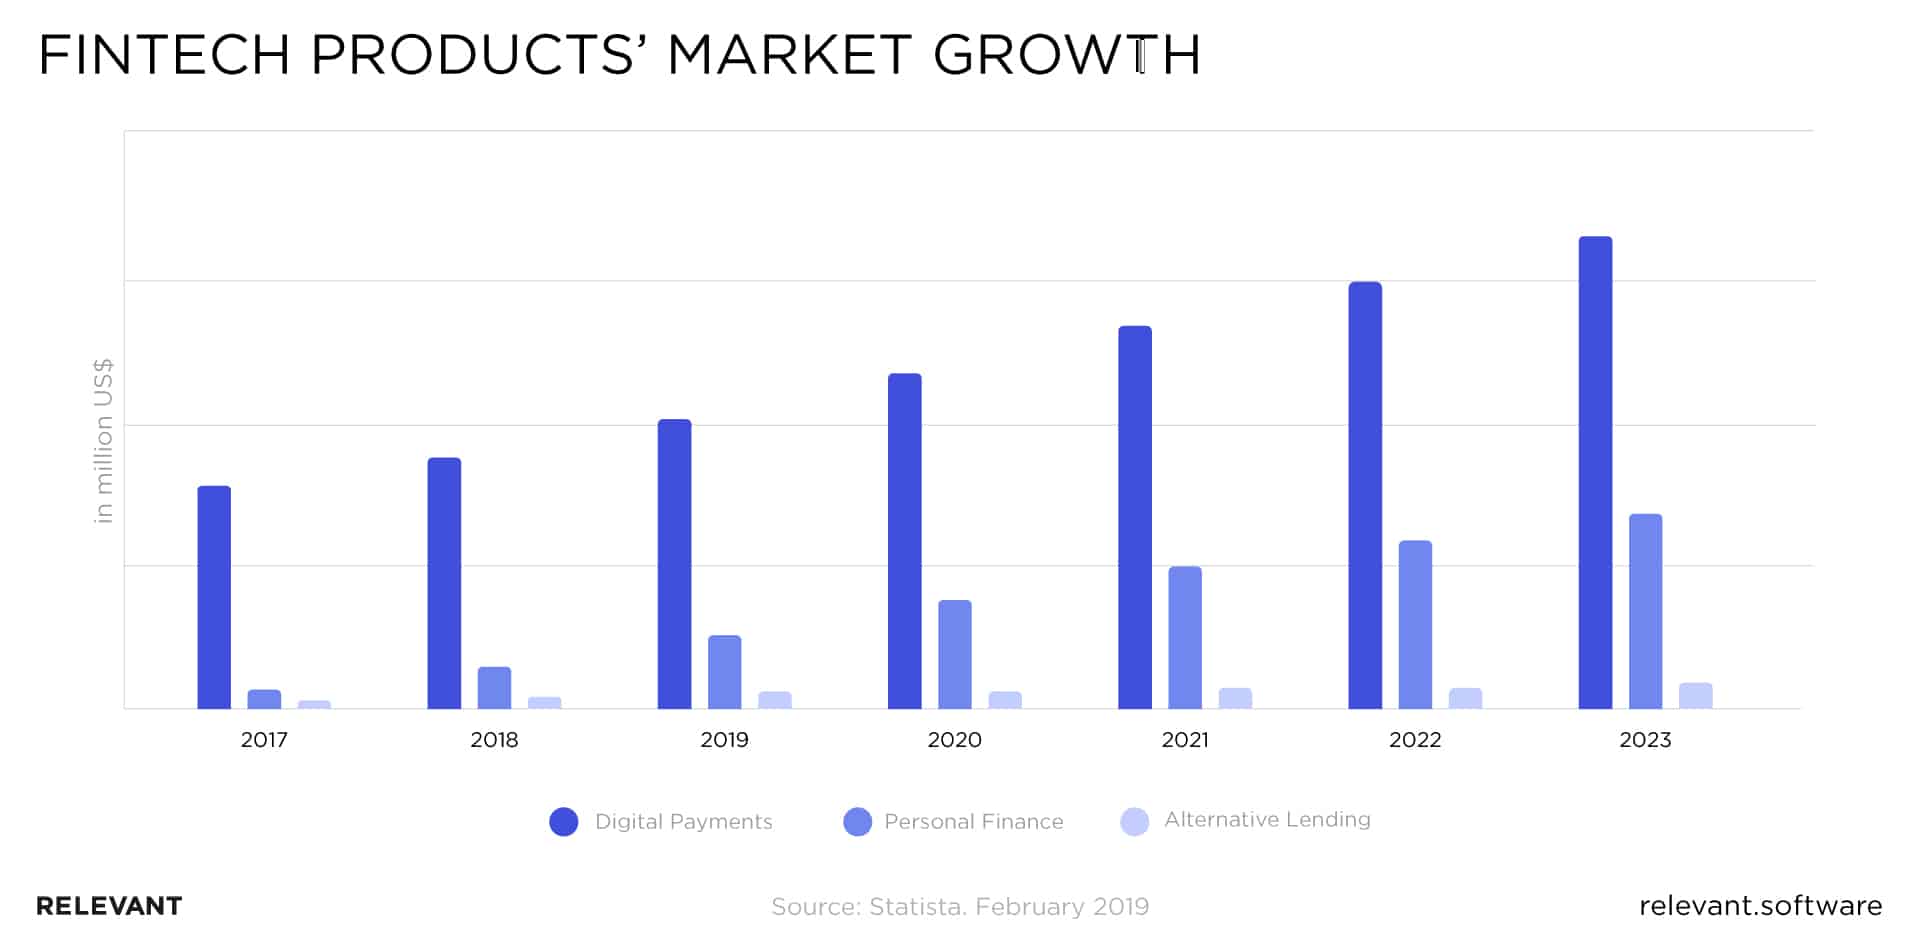 Fintech products’ market growth.